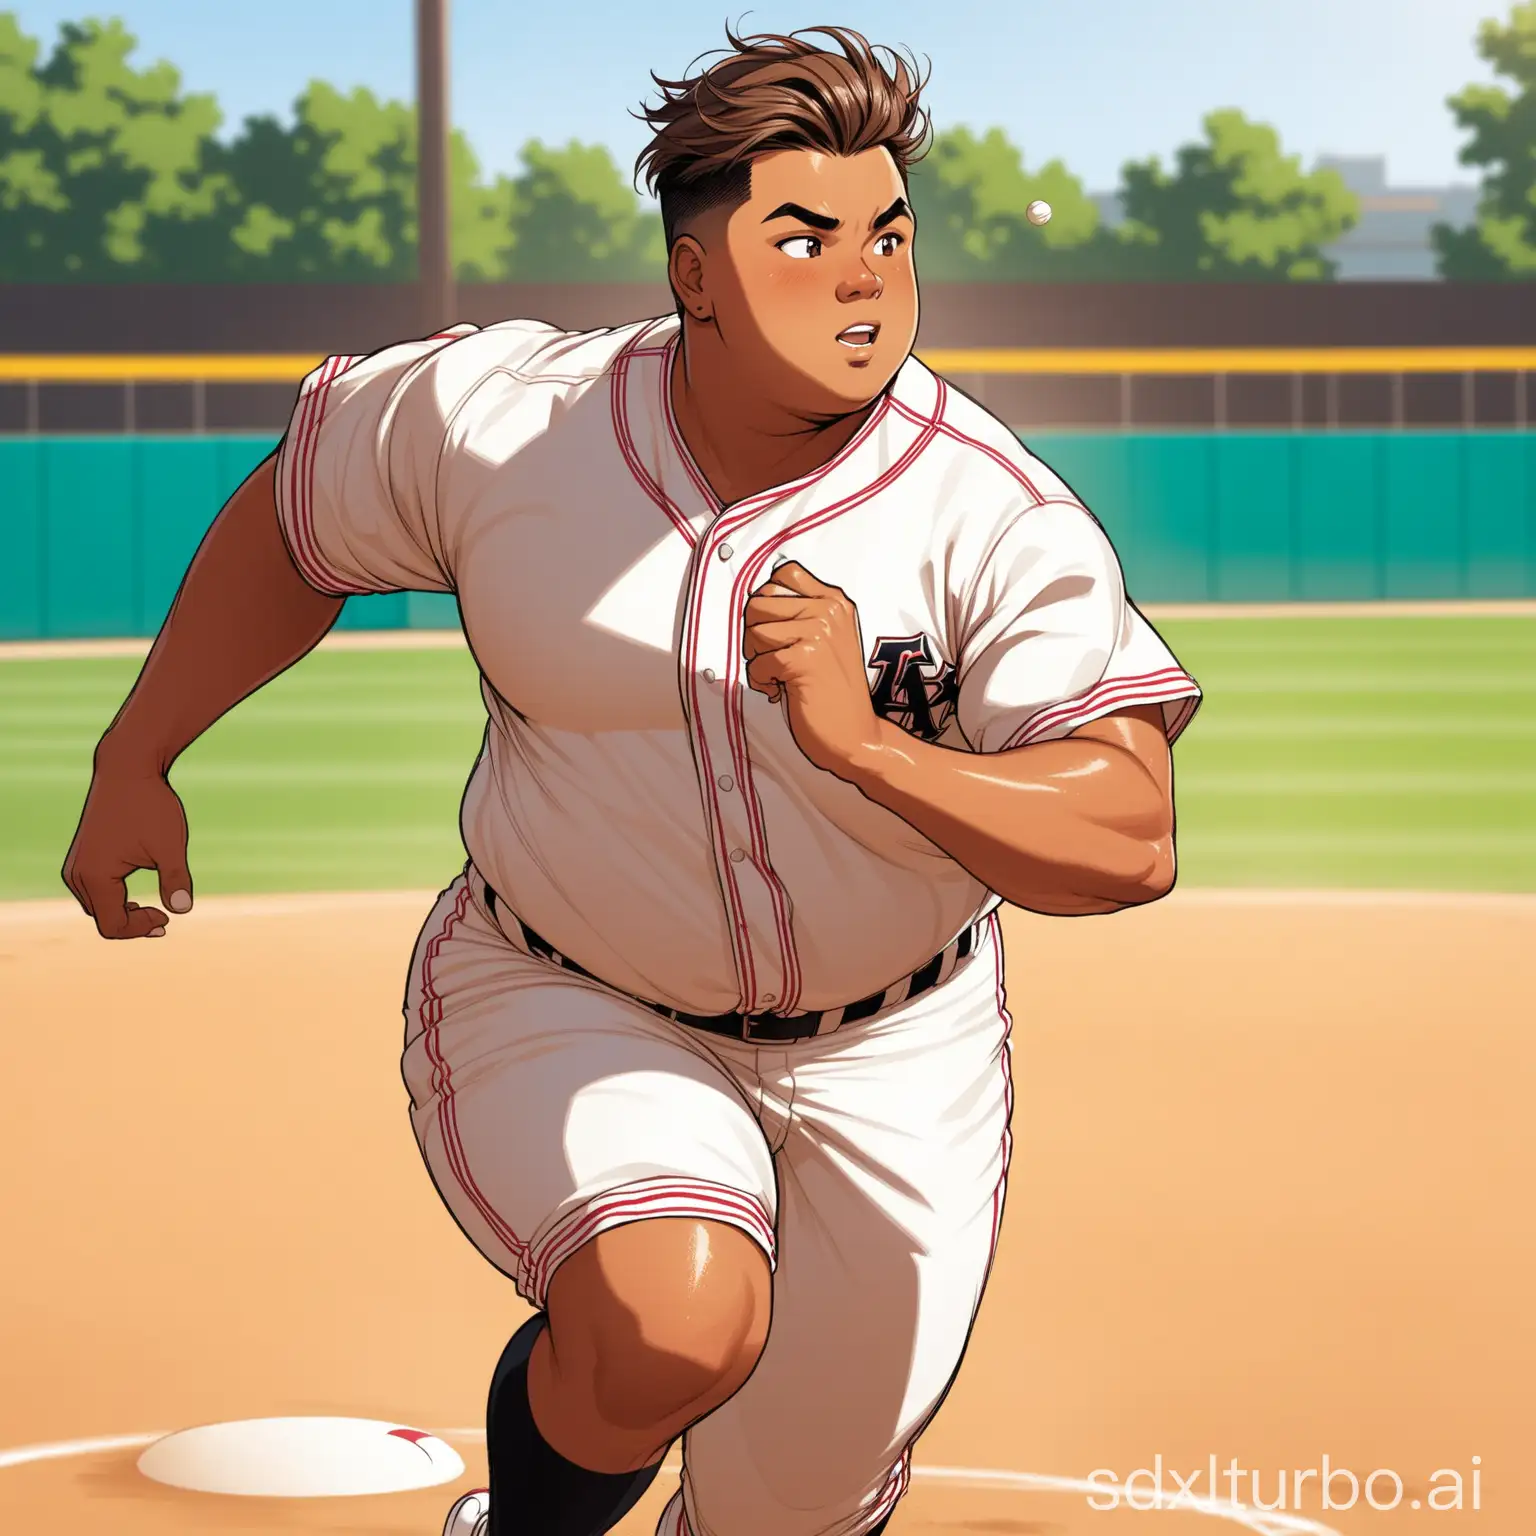 Athletic-Young-Man-with-Stylish-Hair-Playing-Baseball